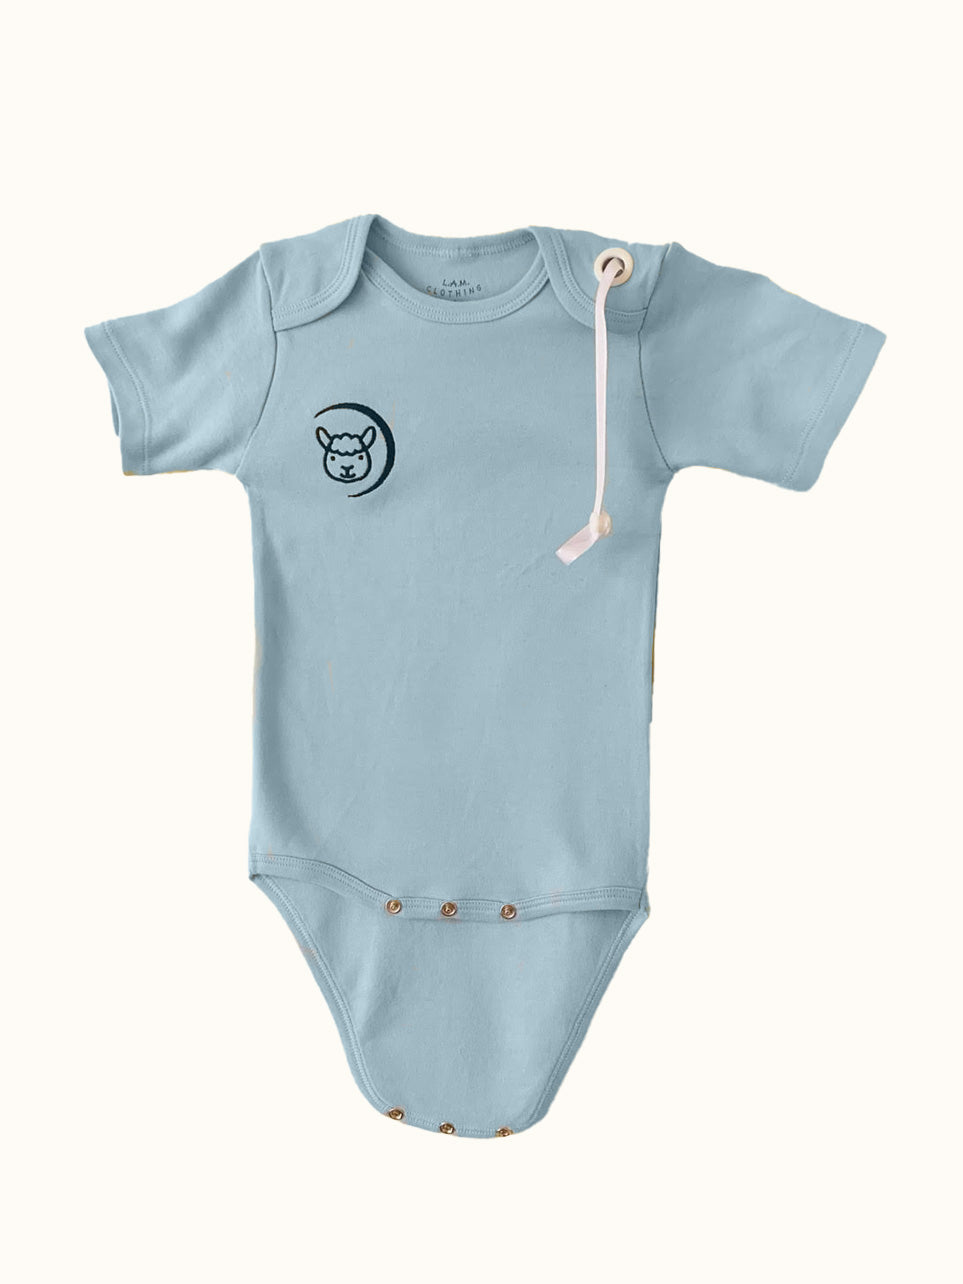 Blue short sleeve Baby Bodysuit with pacifier strap and snap crotch